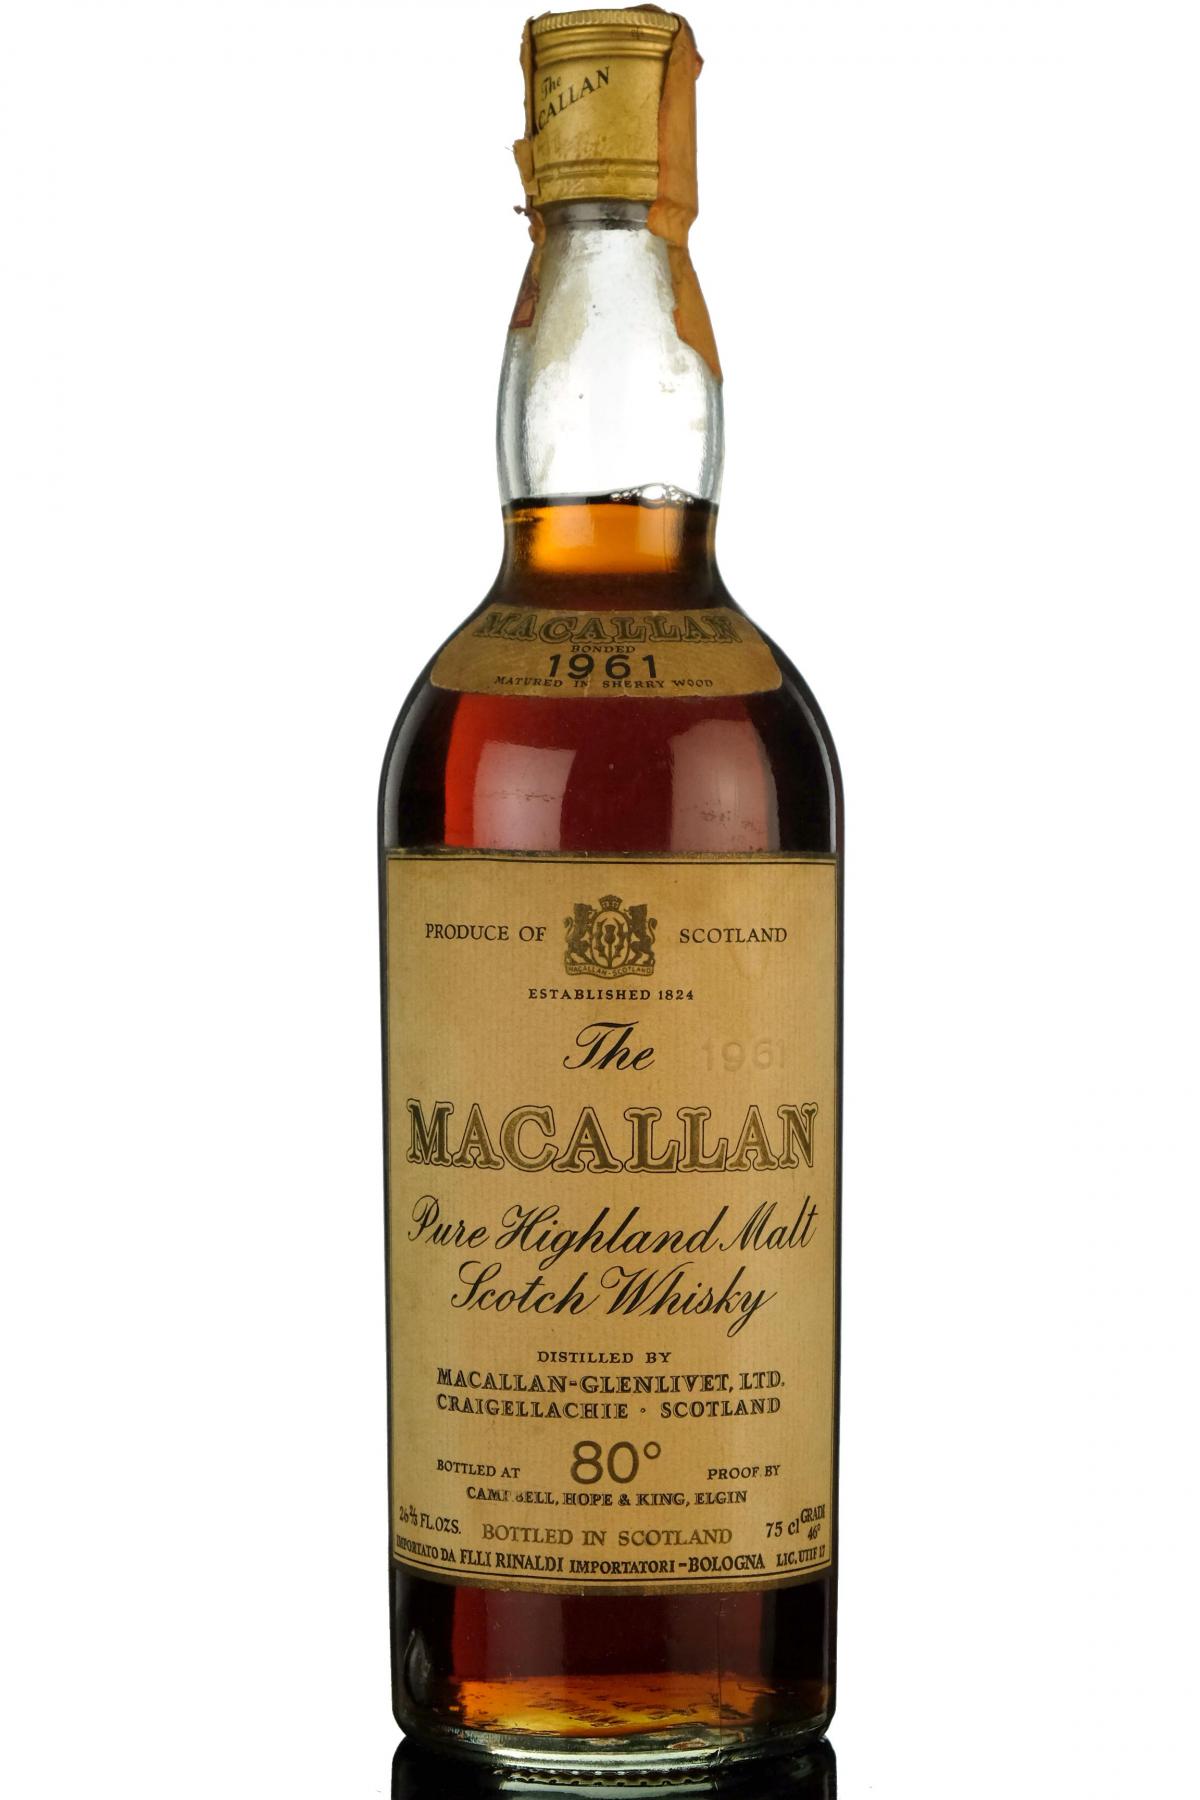 Macallan 1961 - Campbell Hope & King - 1970s